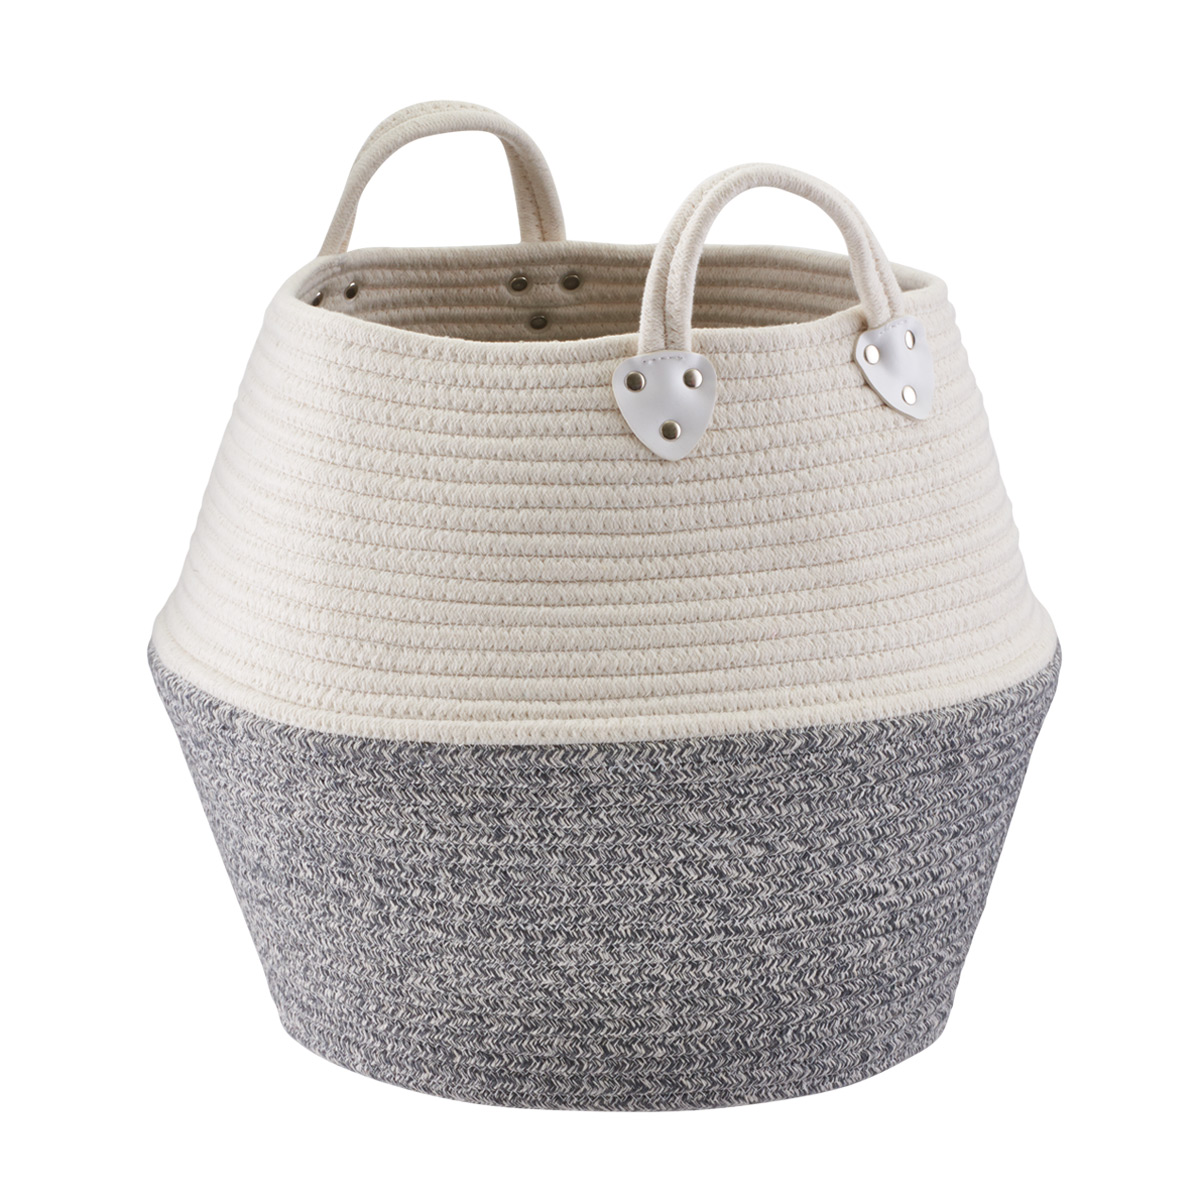 Laguna Cotton Belly Basket | The Container Store